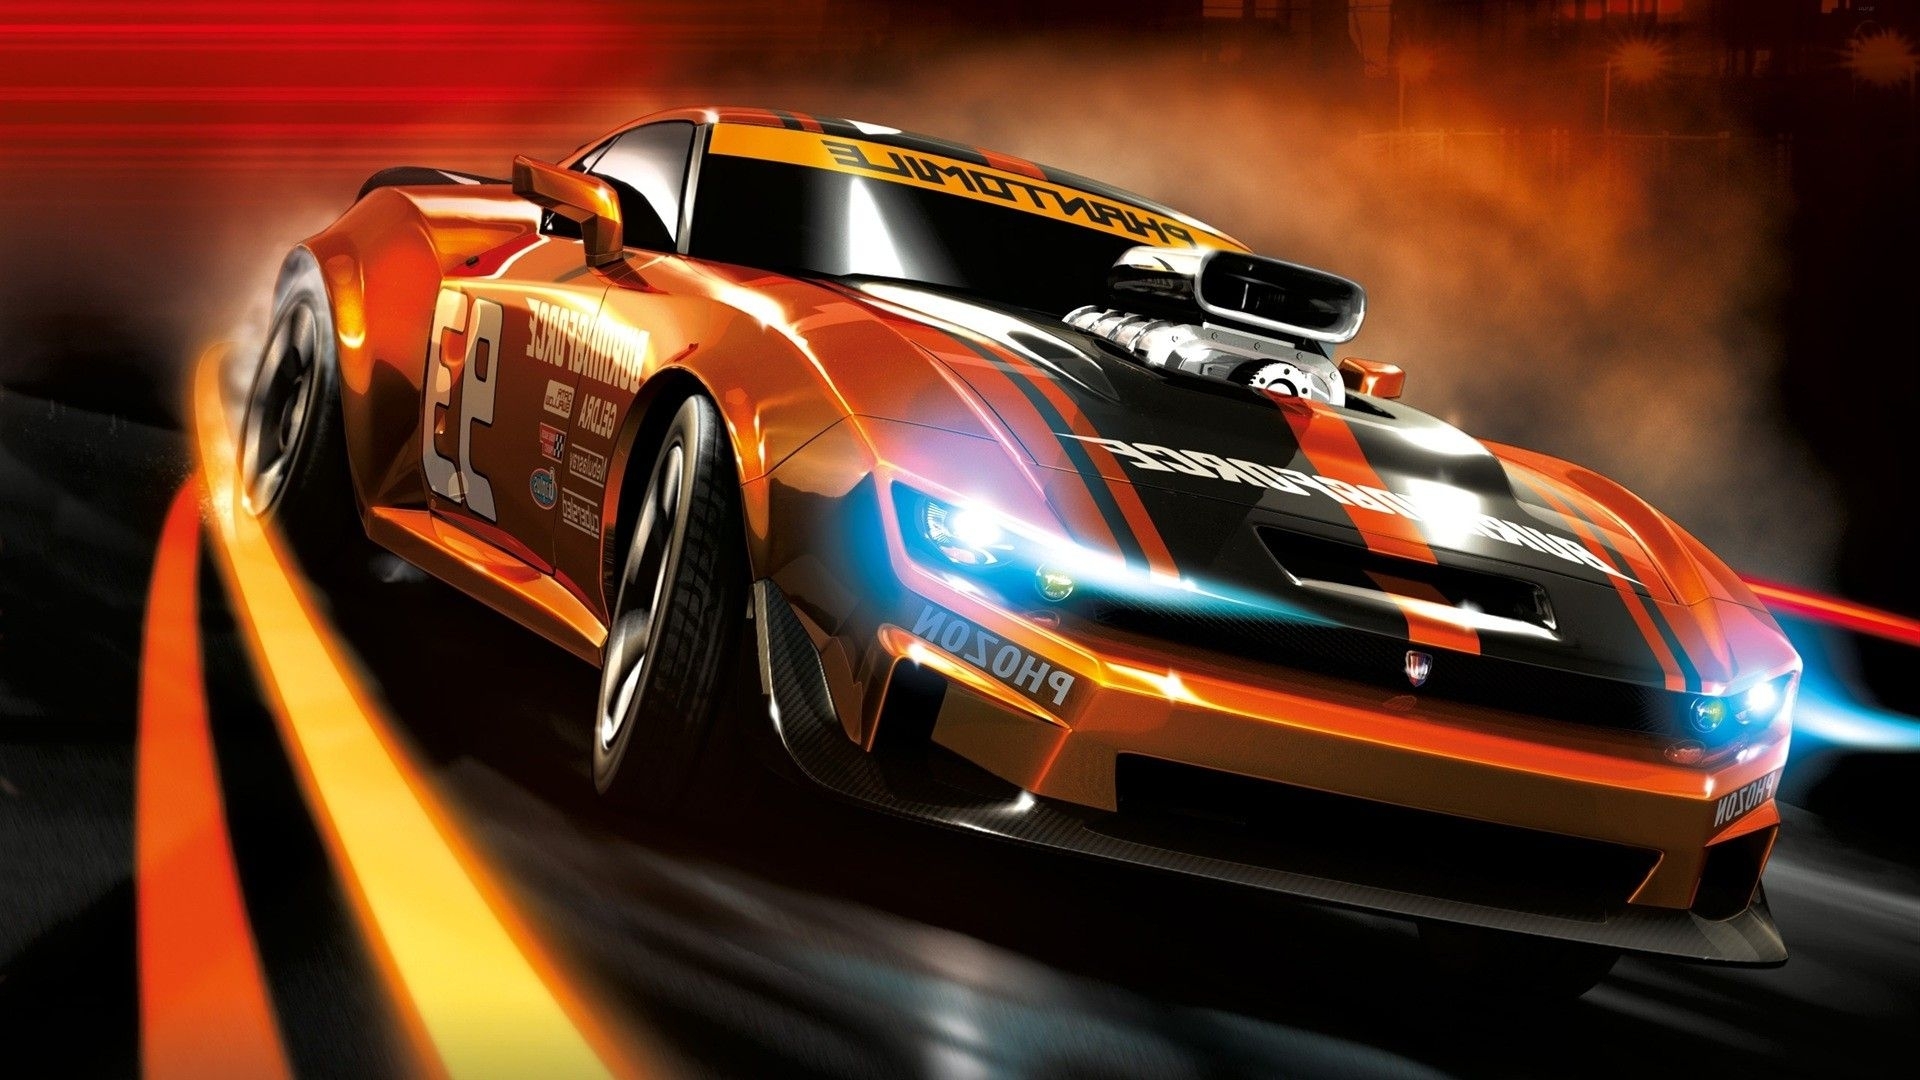 cool wallpapers for boys,land vehicle,sports car racing,vehicle,sports car,car